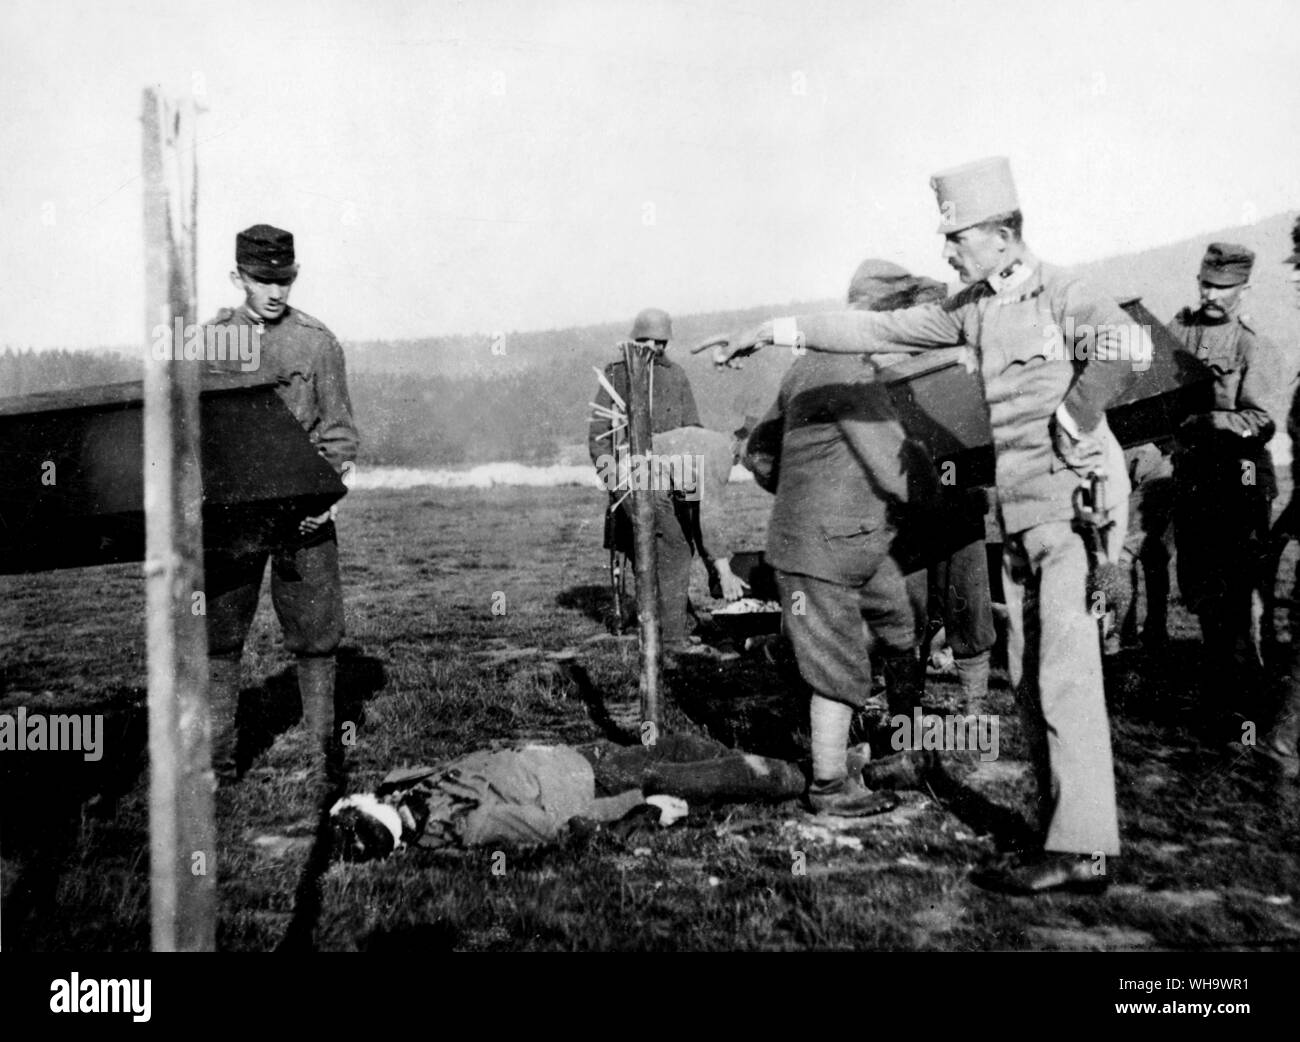 WW1/ 21st May 1918: Soldiers of the reserve battalion belongong to the 7th Rifleman's Regiment of Plzen revolted. This is the execution of the first group of rebels, sentenced to death after the revolt had been put down. Among them, former Russian prisoner of war and revolutionary, Jan Noha and another chief instigator of the revolt, the Corporal Stanislav Vodicha. Stock Photo